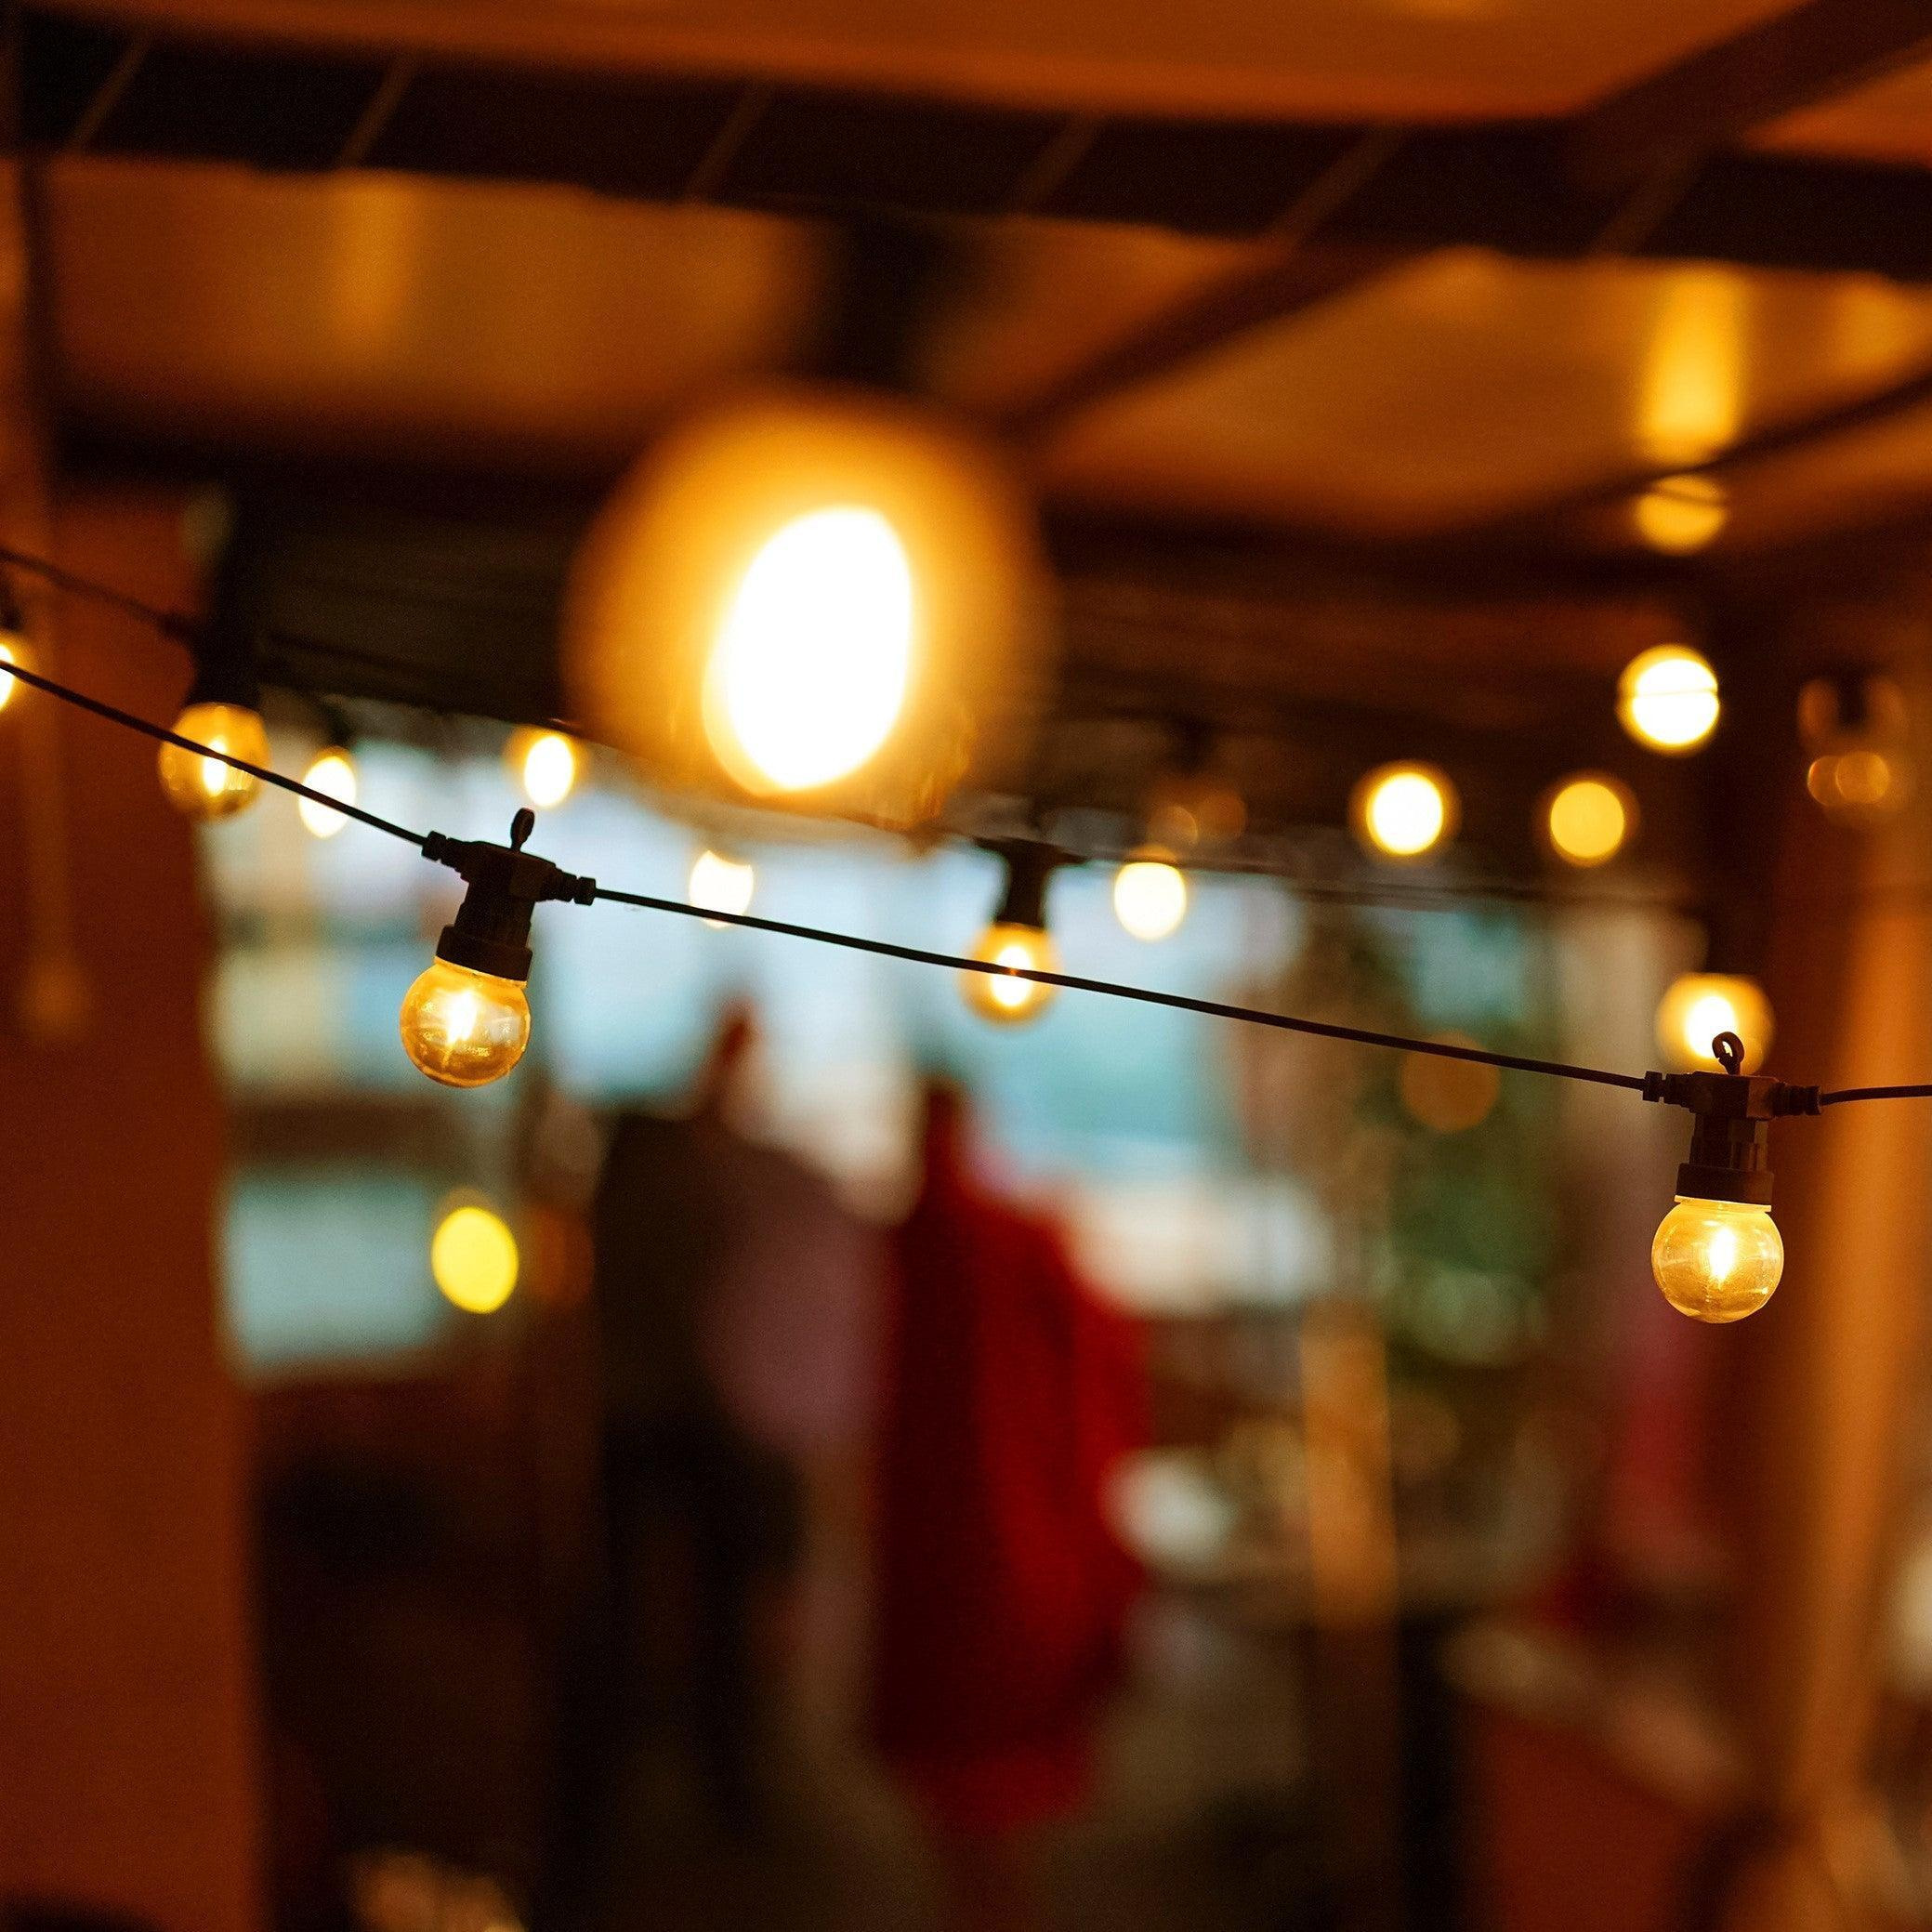 6.5M / 21FT "Super Festoon" Warm White Outdoor Plug-in Inter-connectable LED String Lights